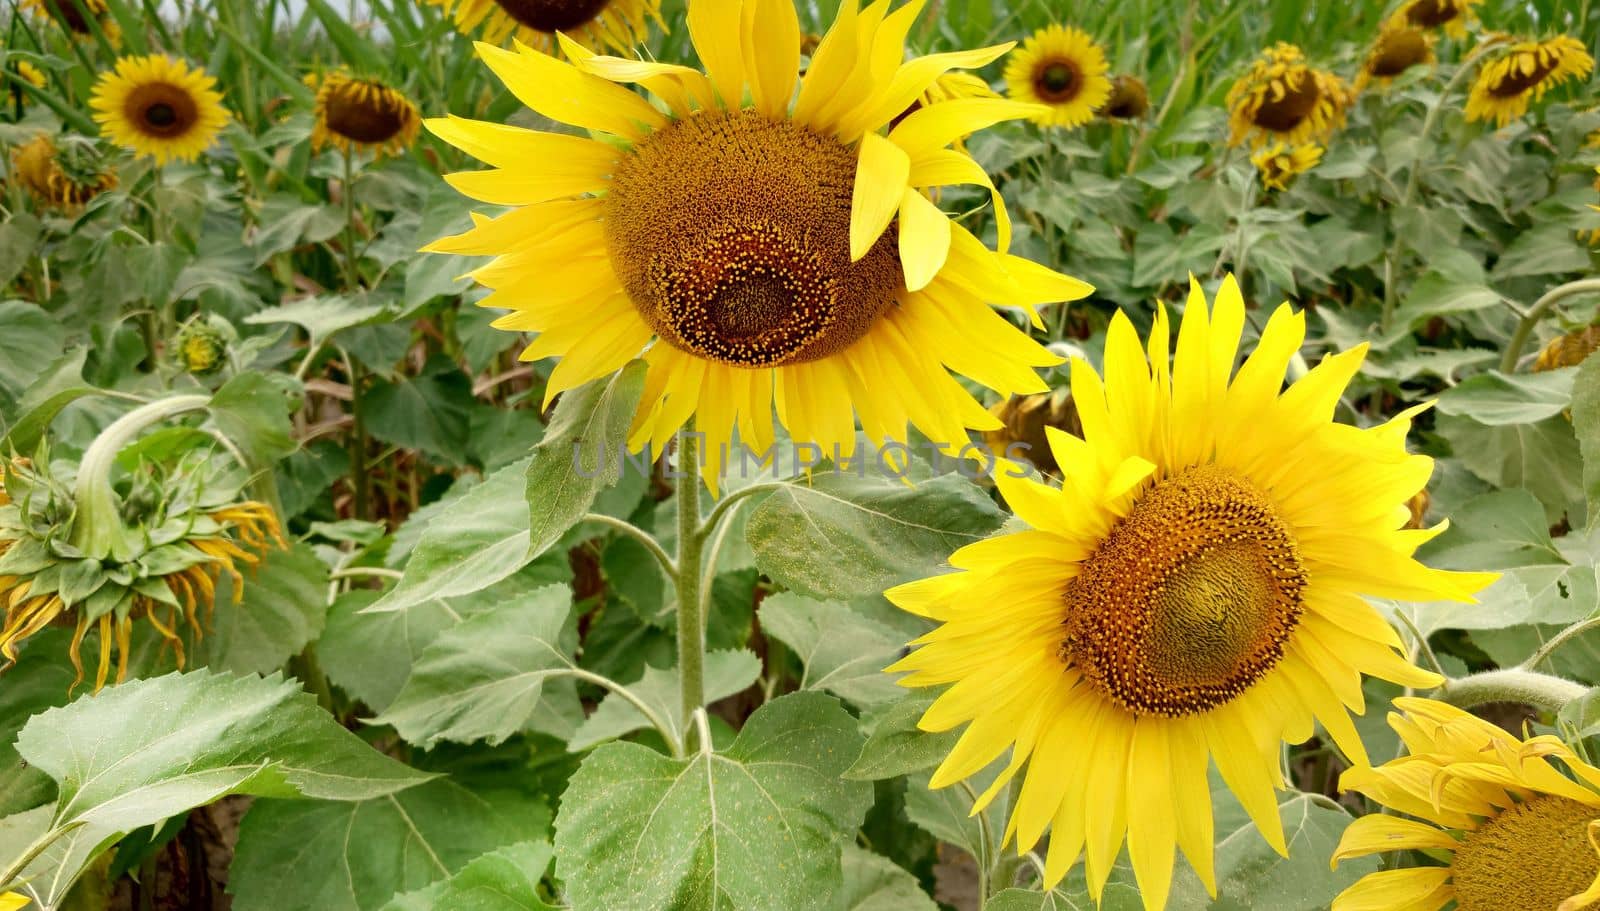 In the foreground are two bright yellow sunflowers in close-up.Texture or background.